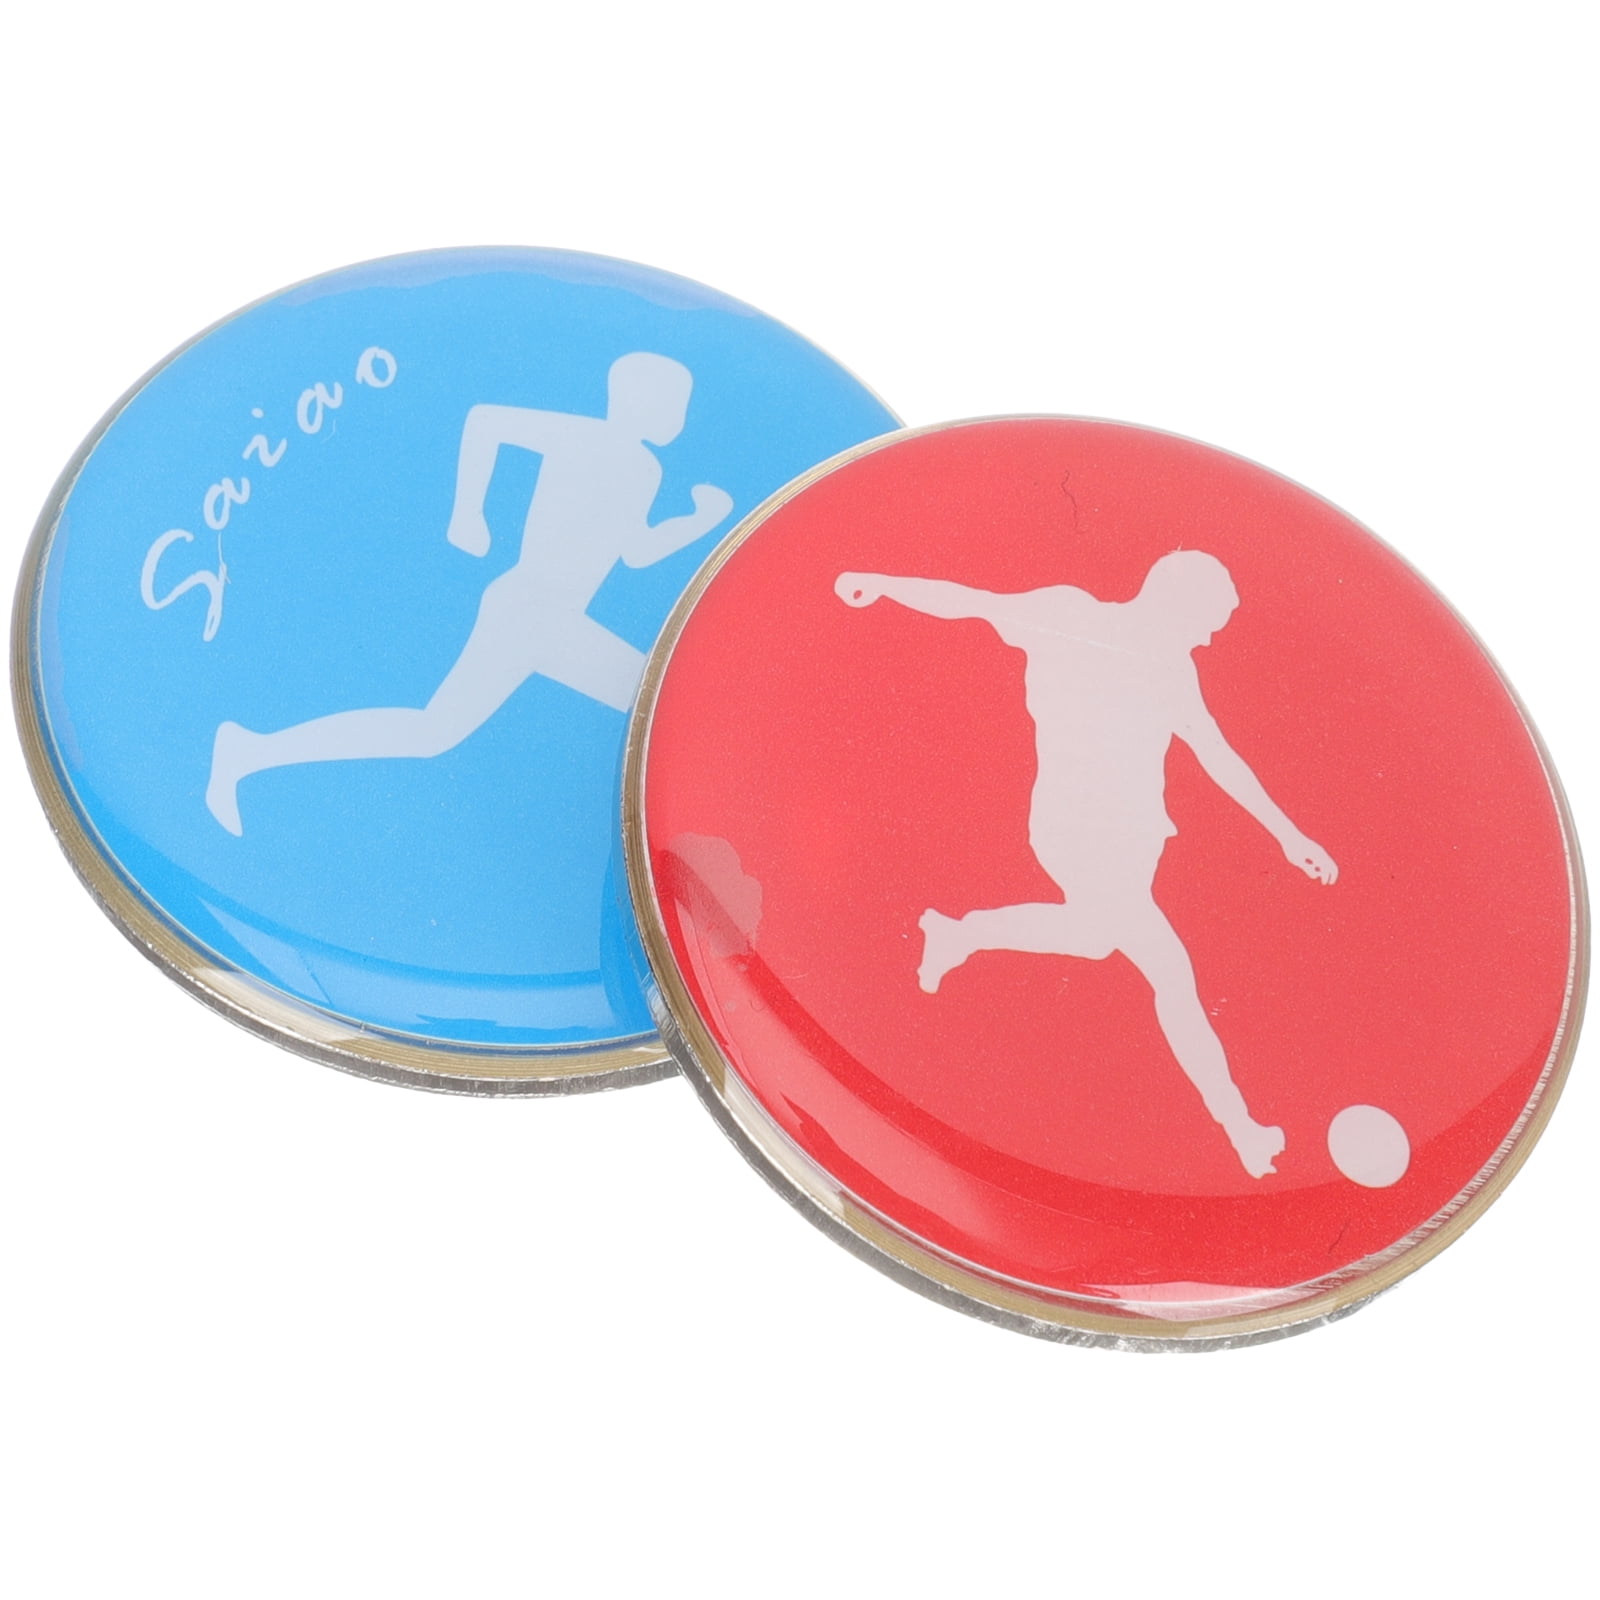 8 Pcs Practical Judge Coins Pingpong Toss Coin Volleyball Referee Coins ...